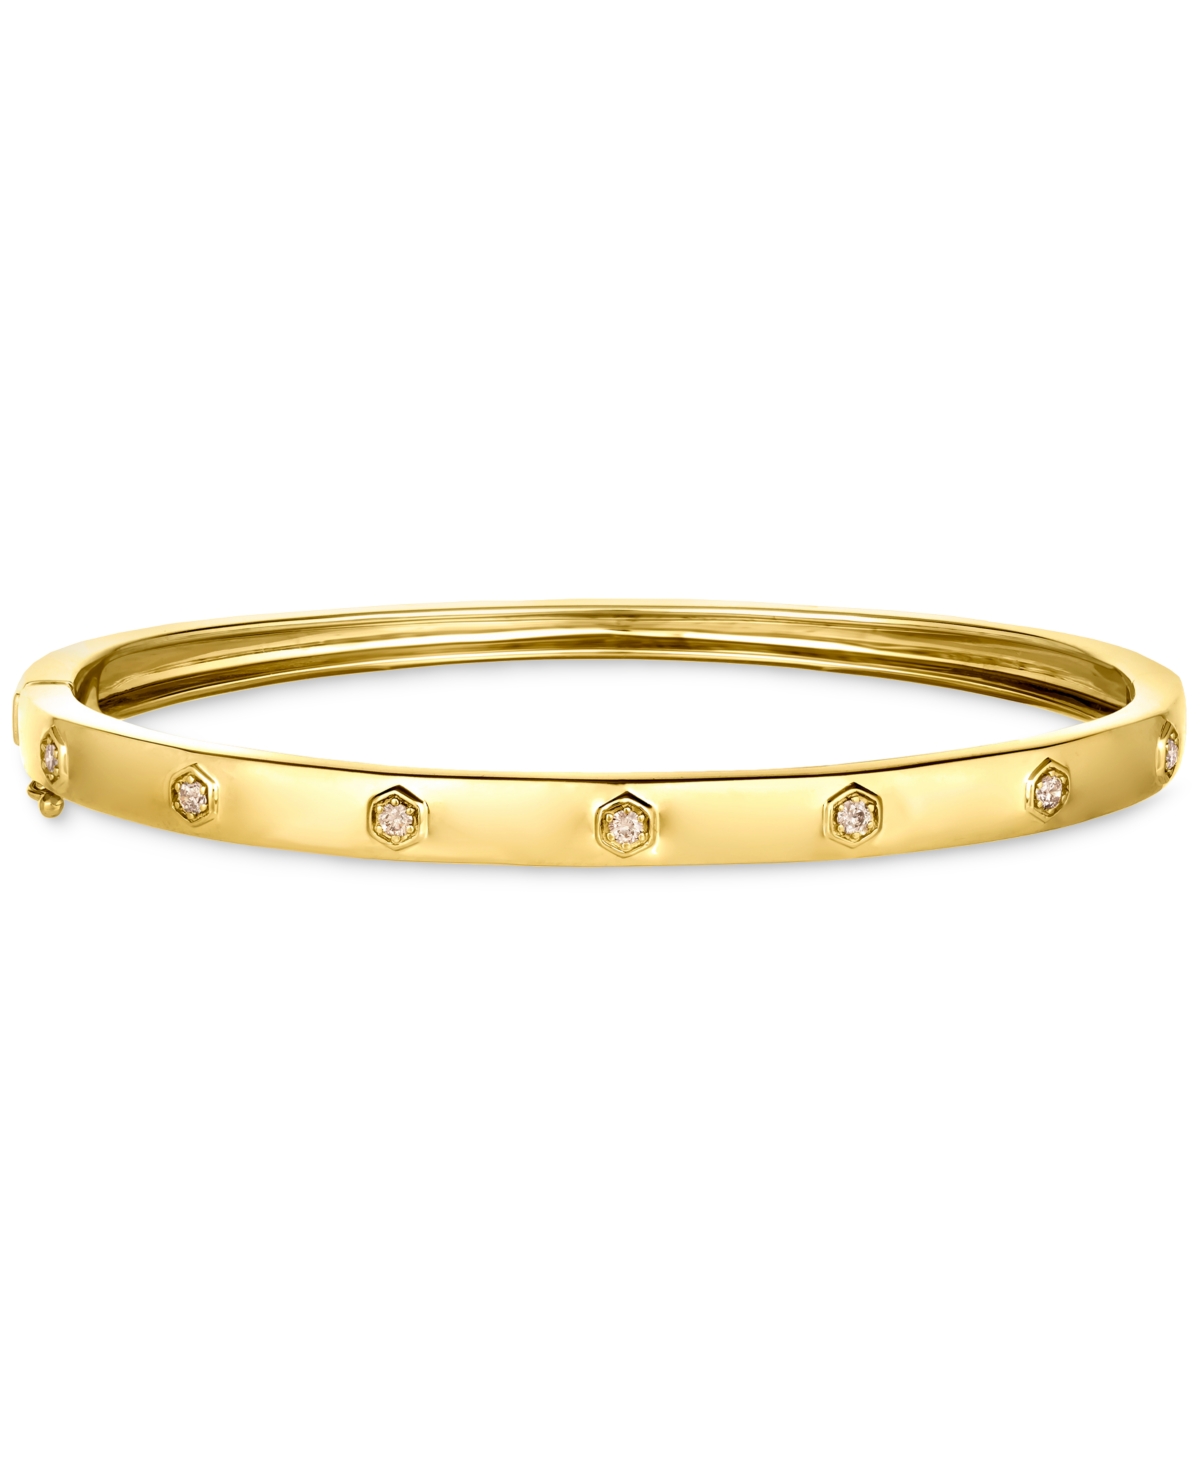 Anywear Everywear Nude Diamond Bangle Bracelet (1/5 ct. t.w.) in 14k Gold (Also Available in Rose Gold or White Gold) - K Strawberry Gold Bang